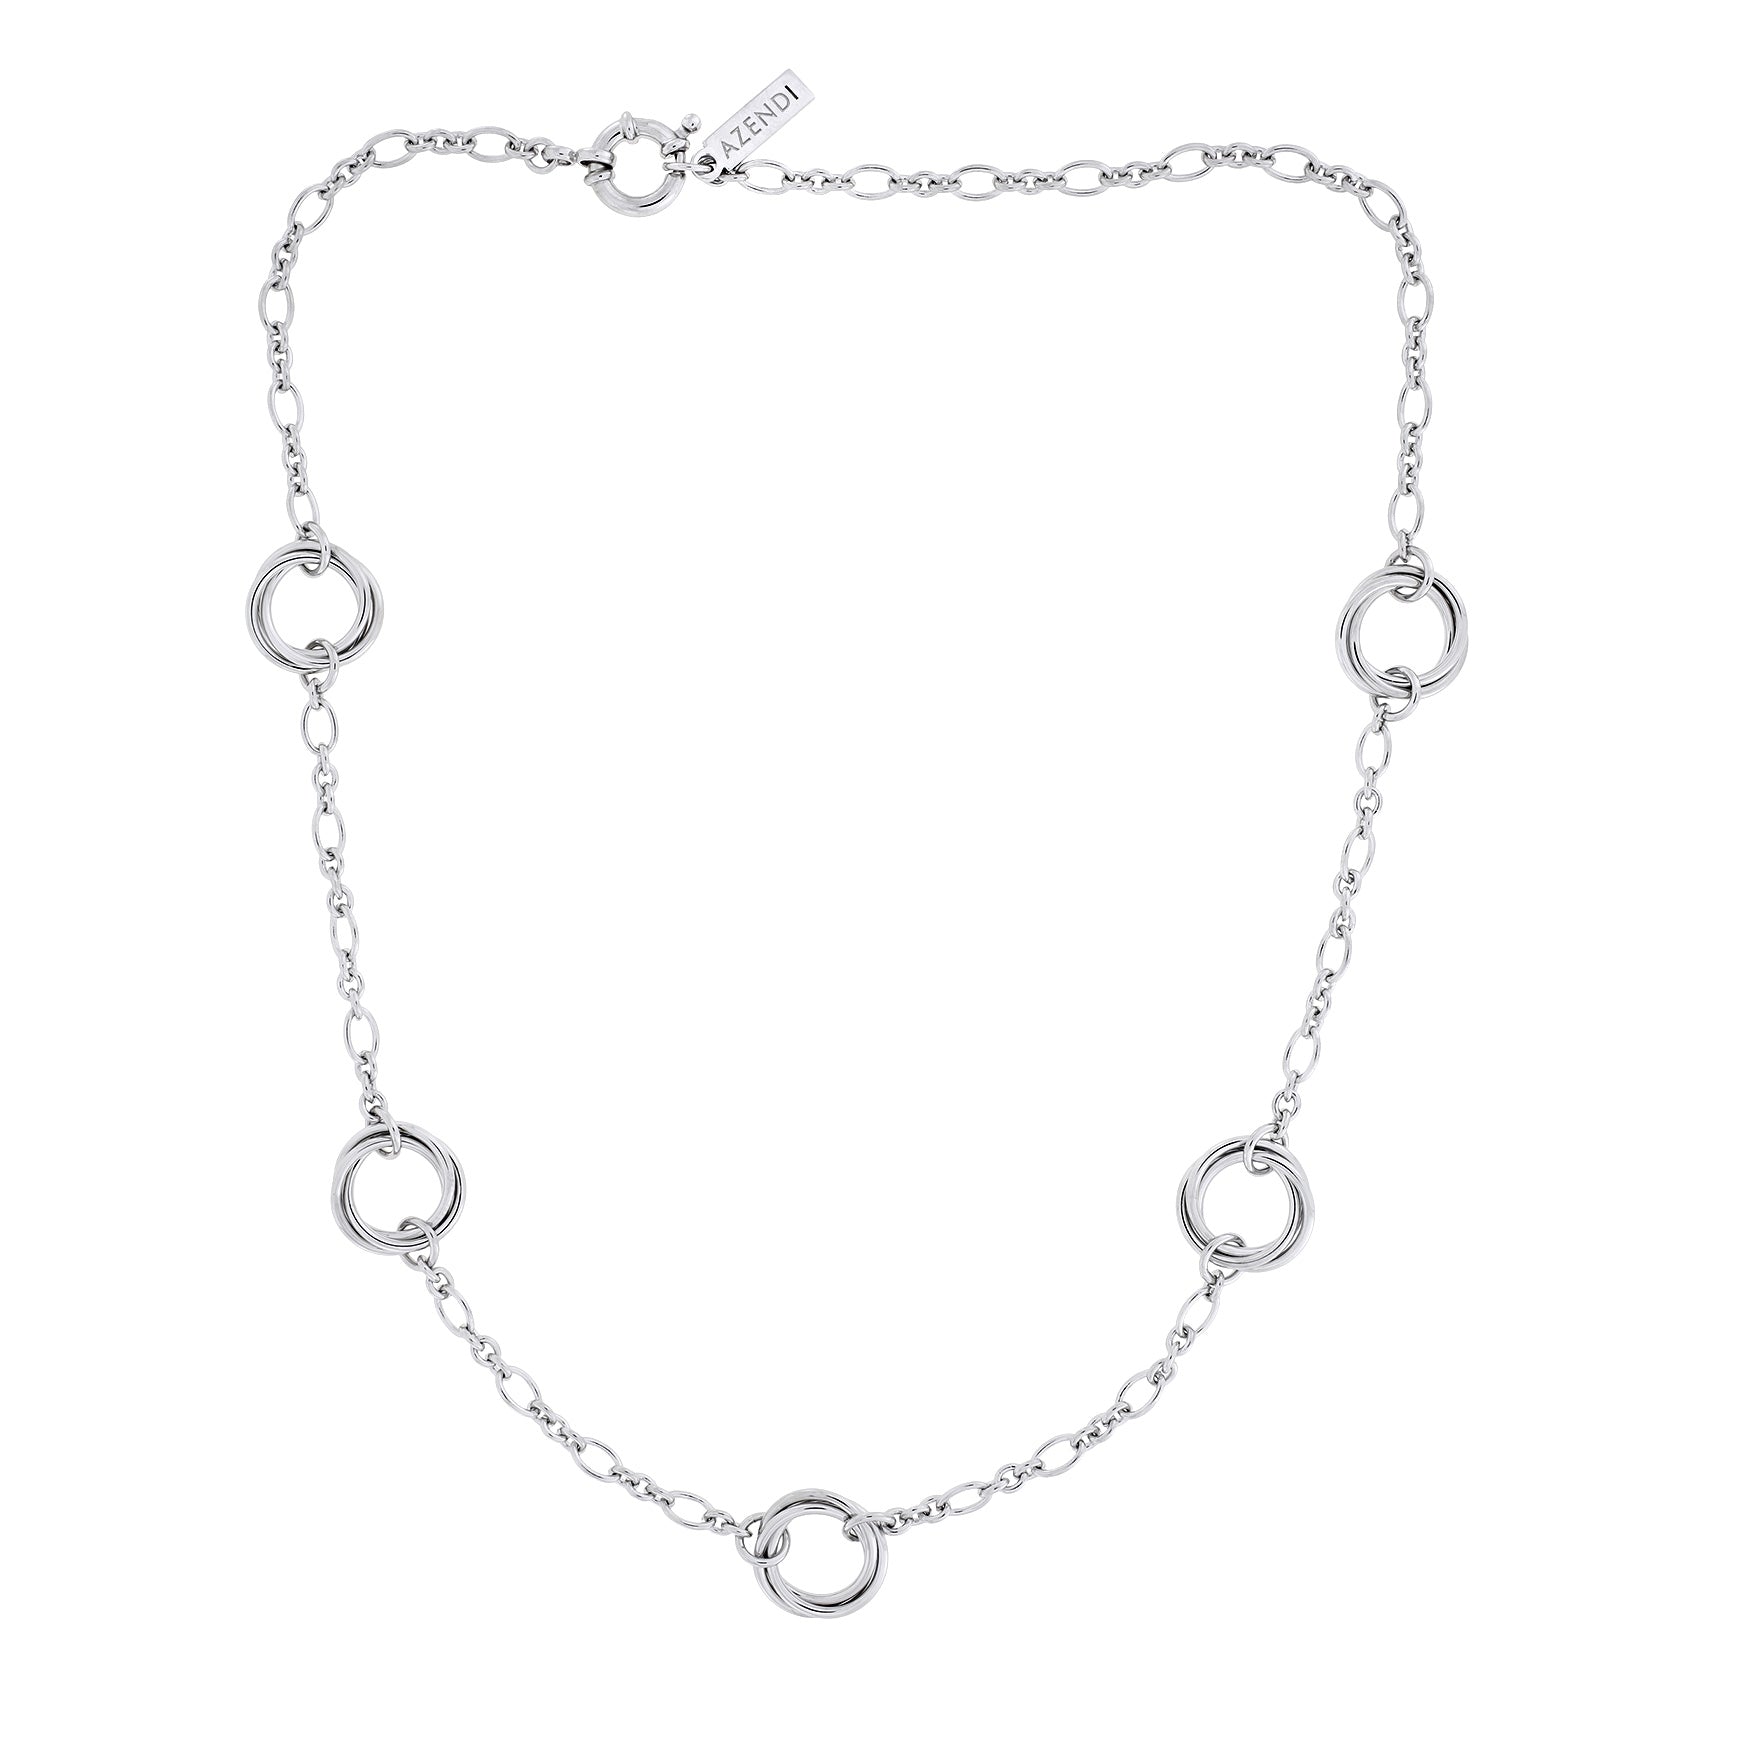 Entangled Multiple Love Knot Necklace